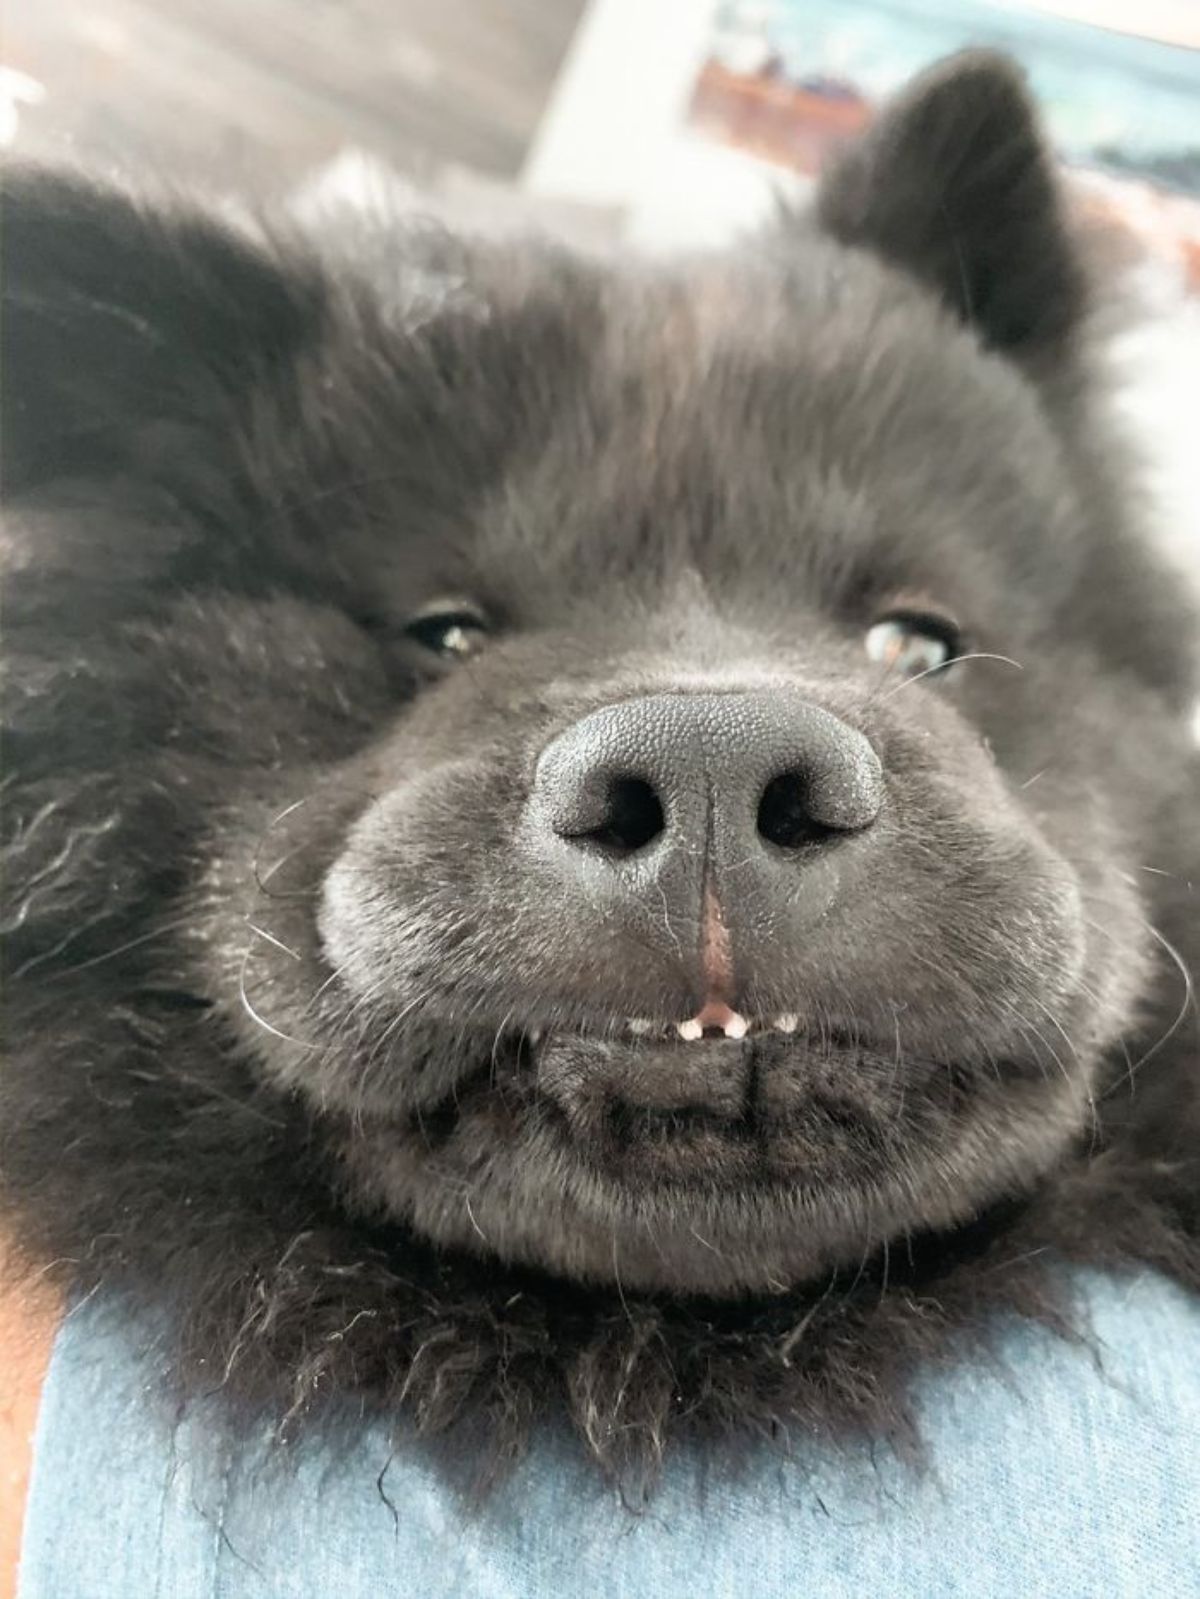 close up of black dog's face with 4 small teeth showing